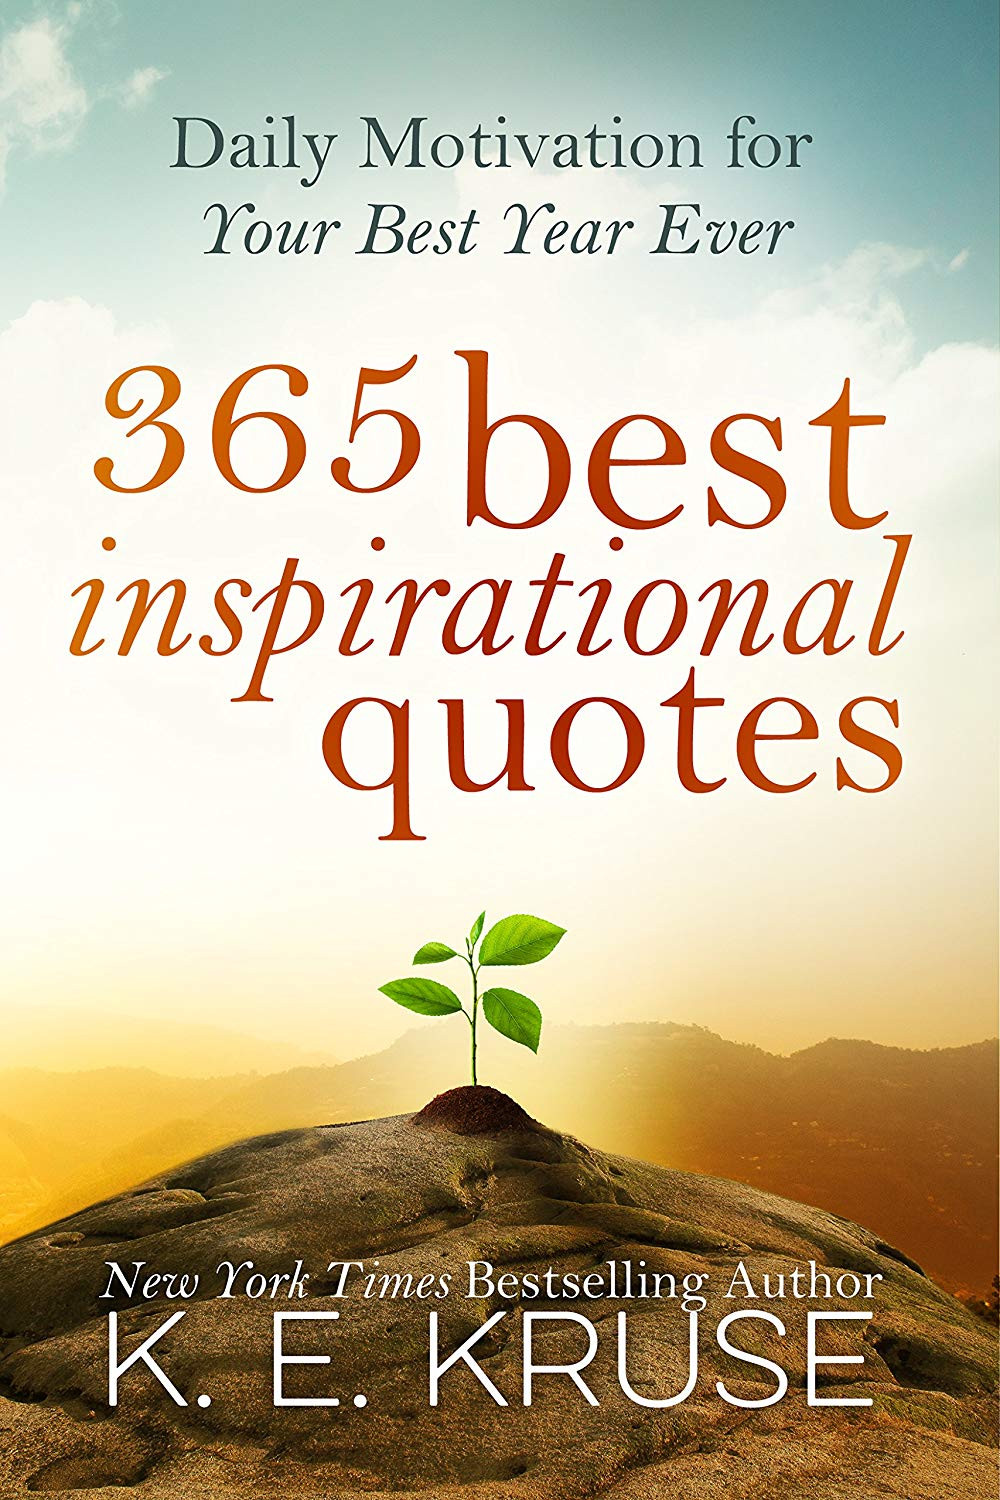 Best Motivational Quotes Ever
 Best Ever Inspirational Quotes QuotesGram